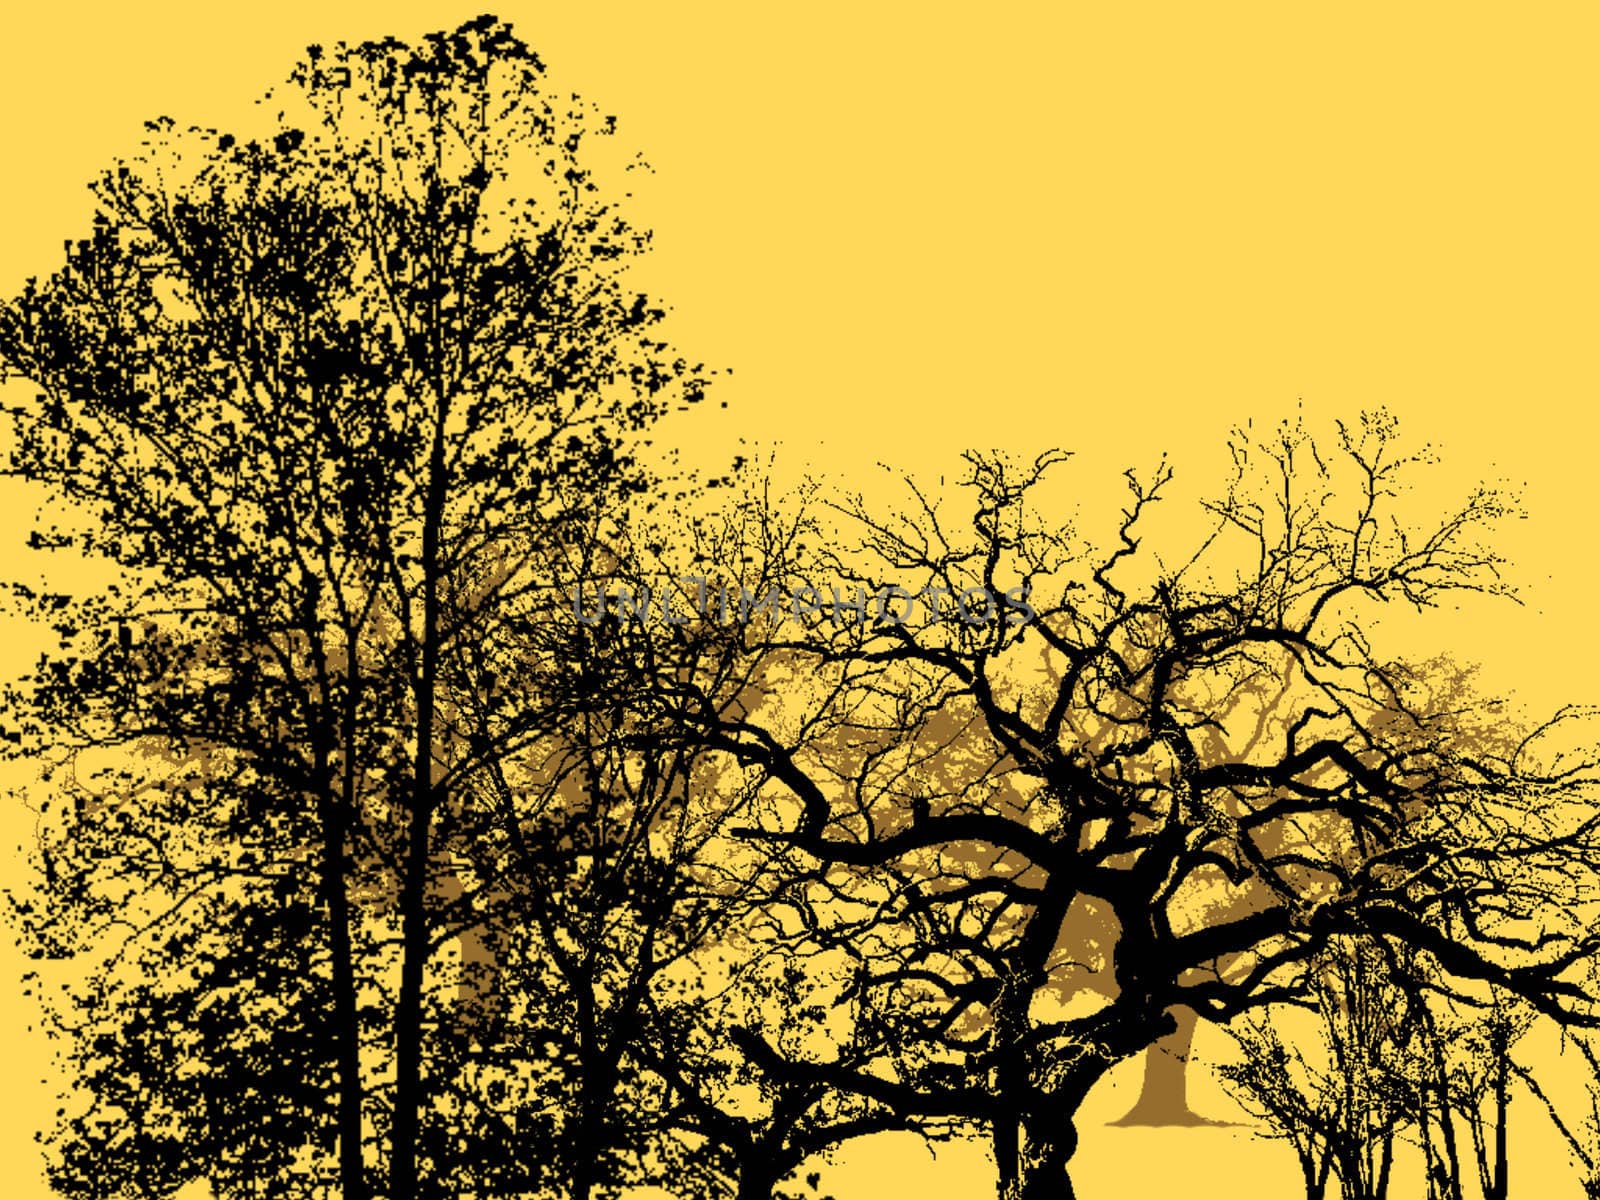 Silhouettes of Trees in Black on Autumn Background Illustration Design